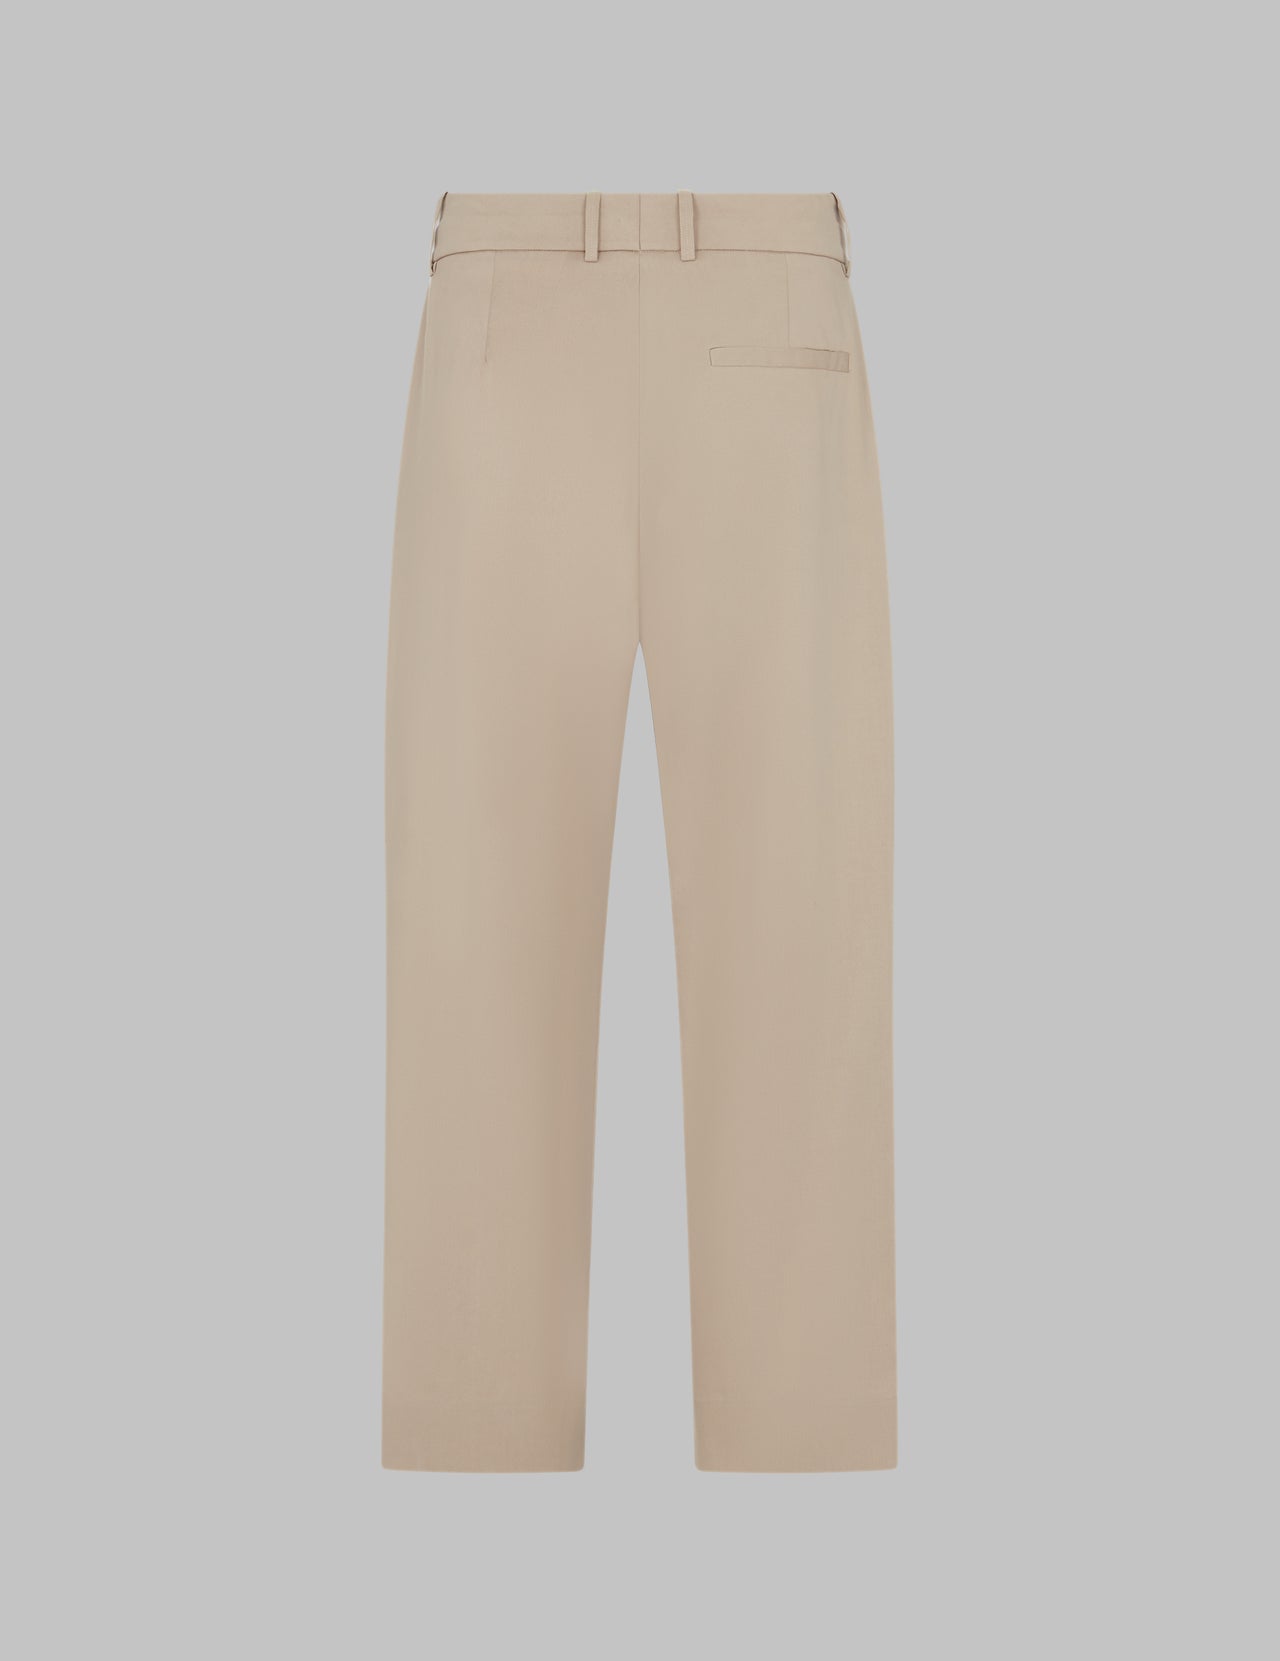  Sand Tapered Margoa Trousers  